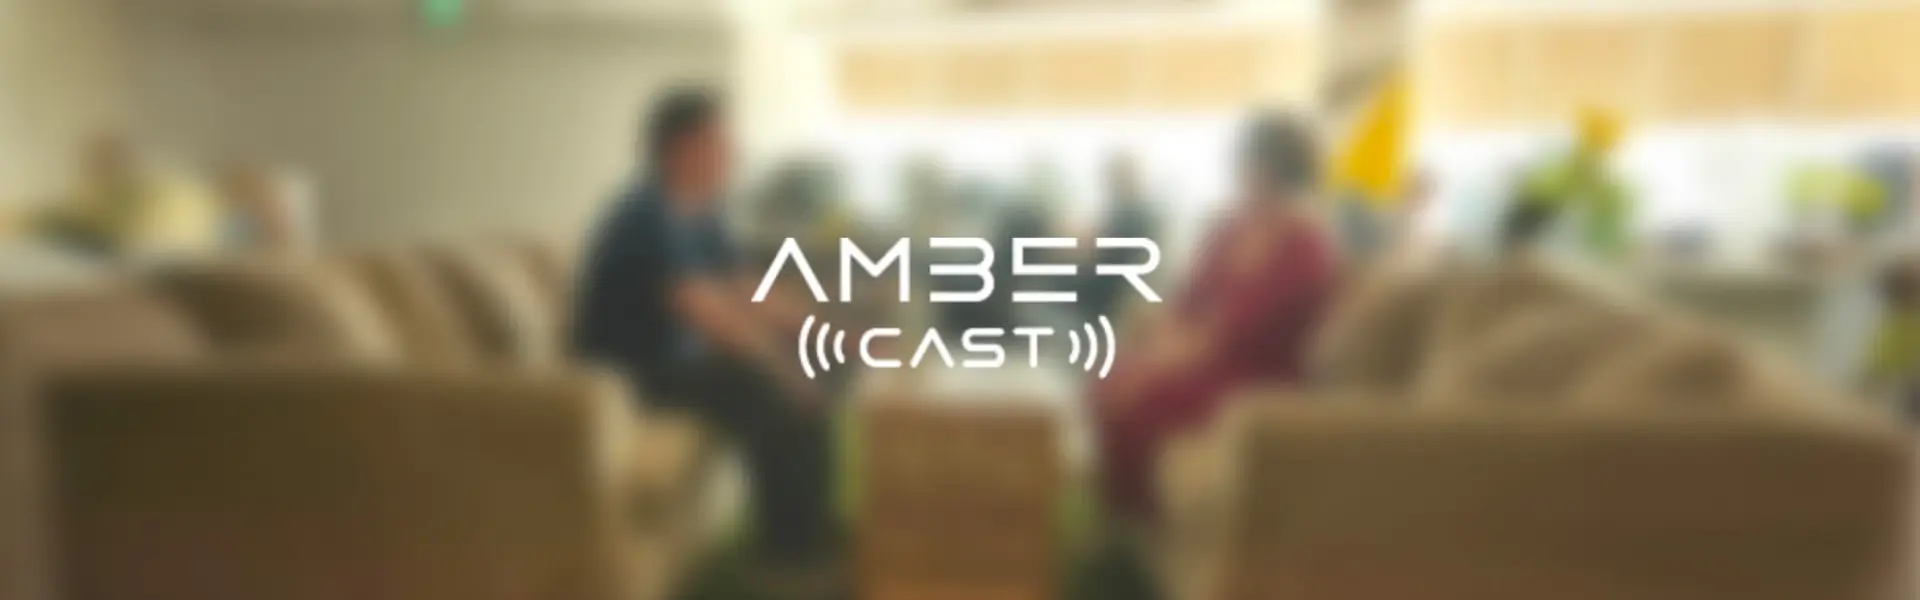 What's in Store for Amber's Future? - AmberCast with Mihai Pohontu and Jaime Gine